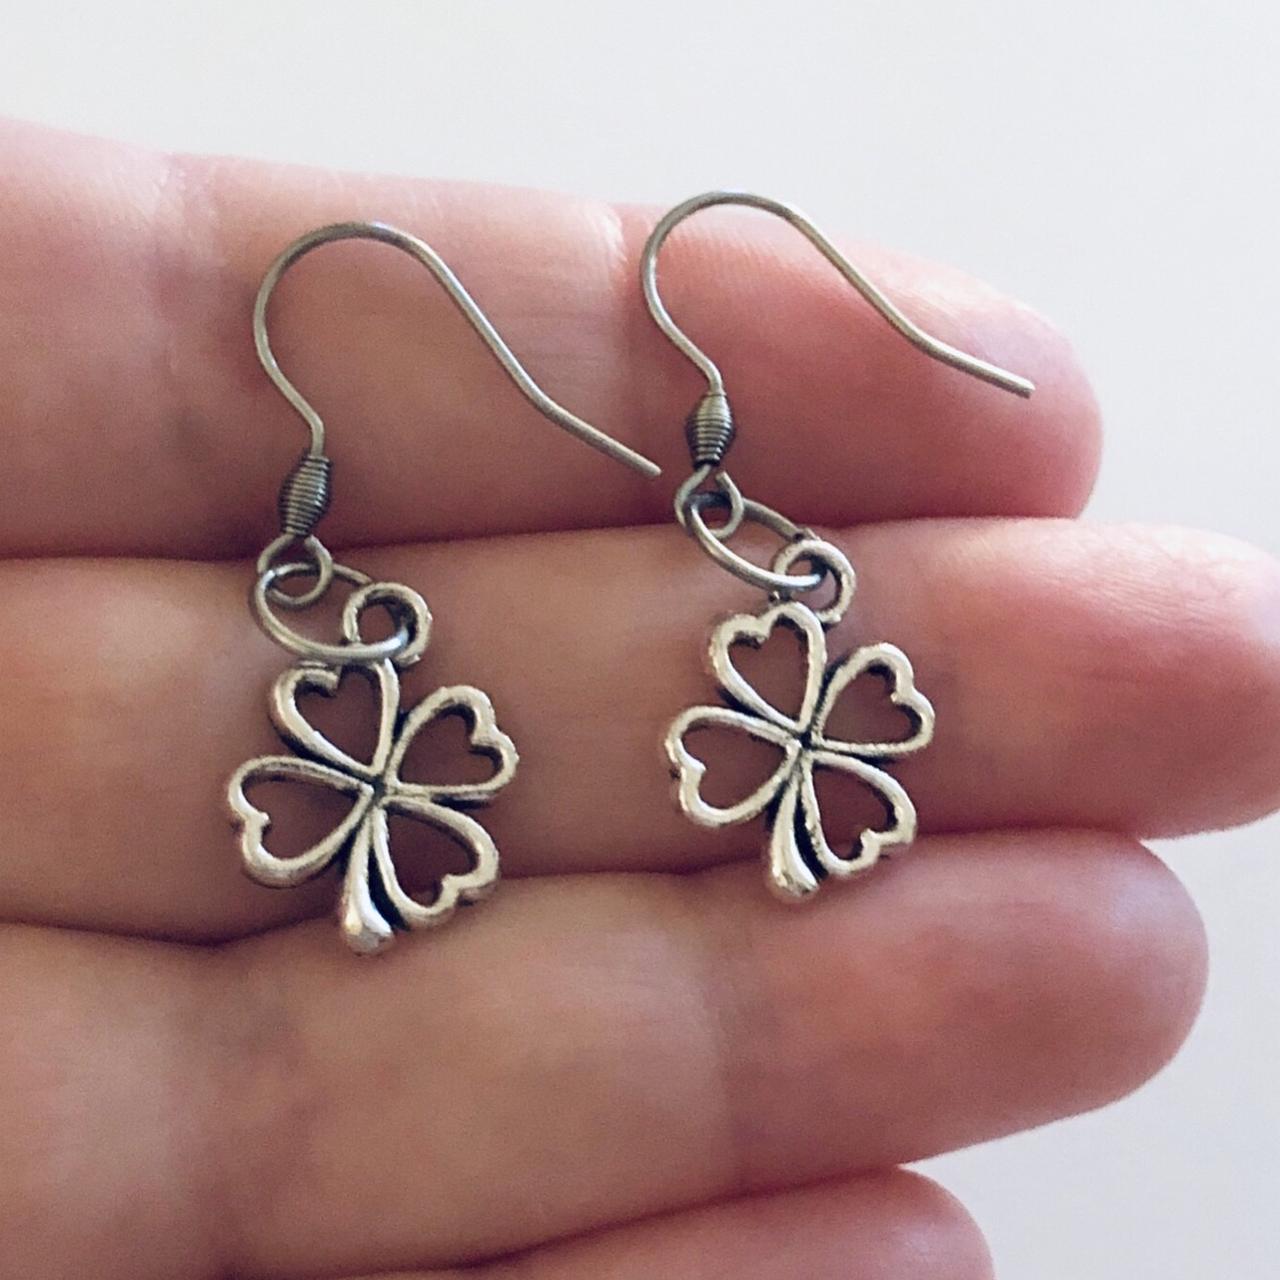 Product Image 1 - Four leaf clover earrings, flower